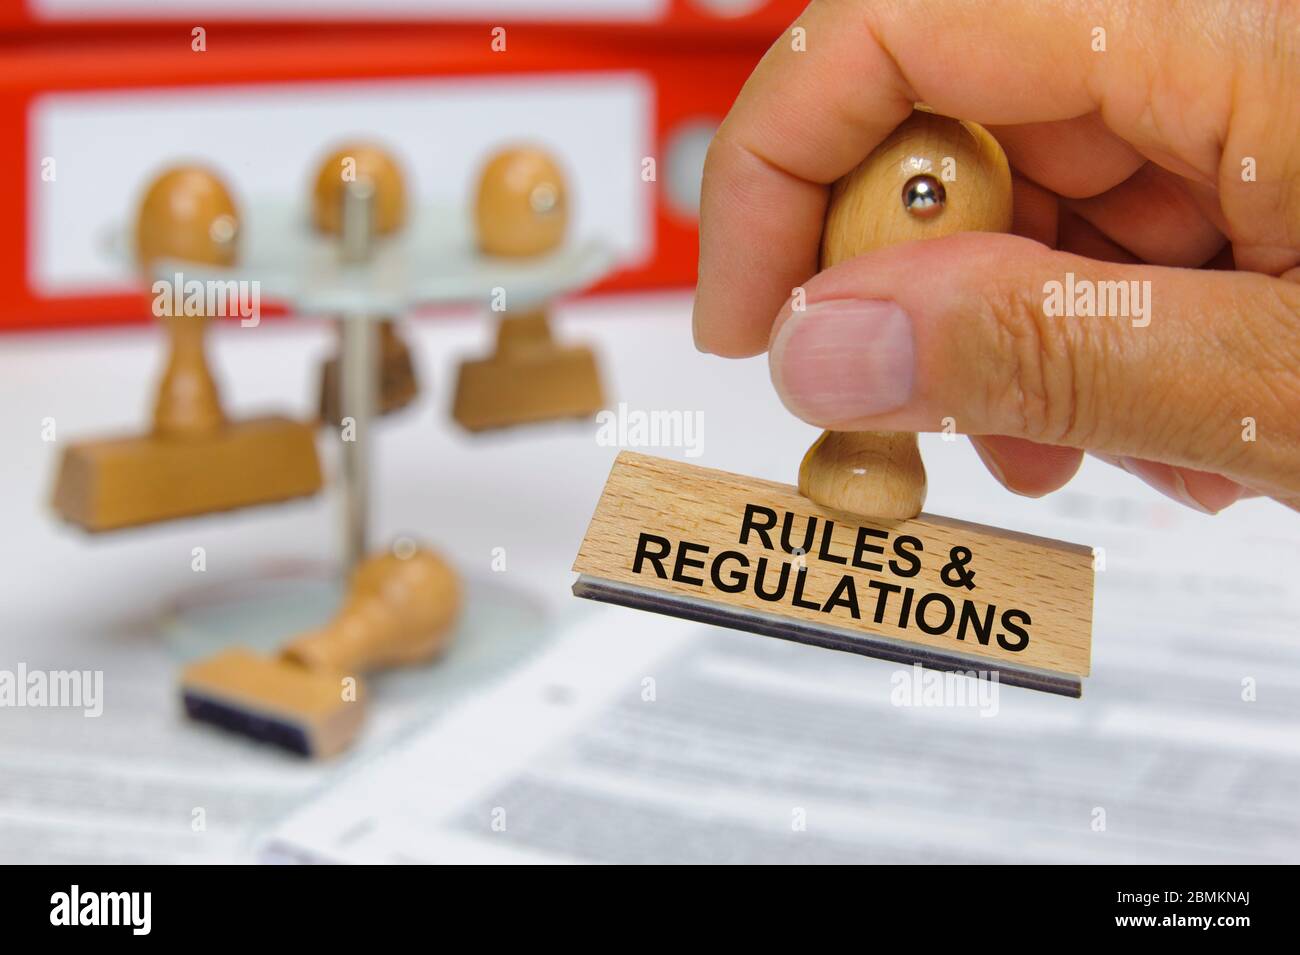 rules and regulations printed on rubber stamp in hand Stock Photo